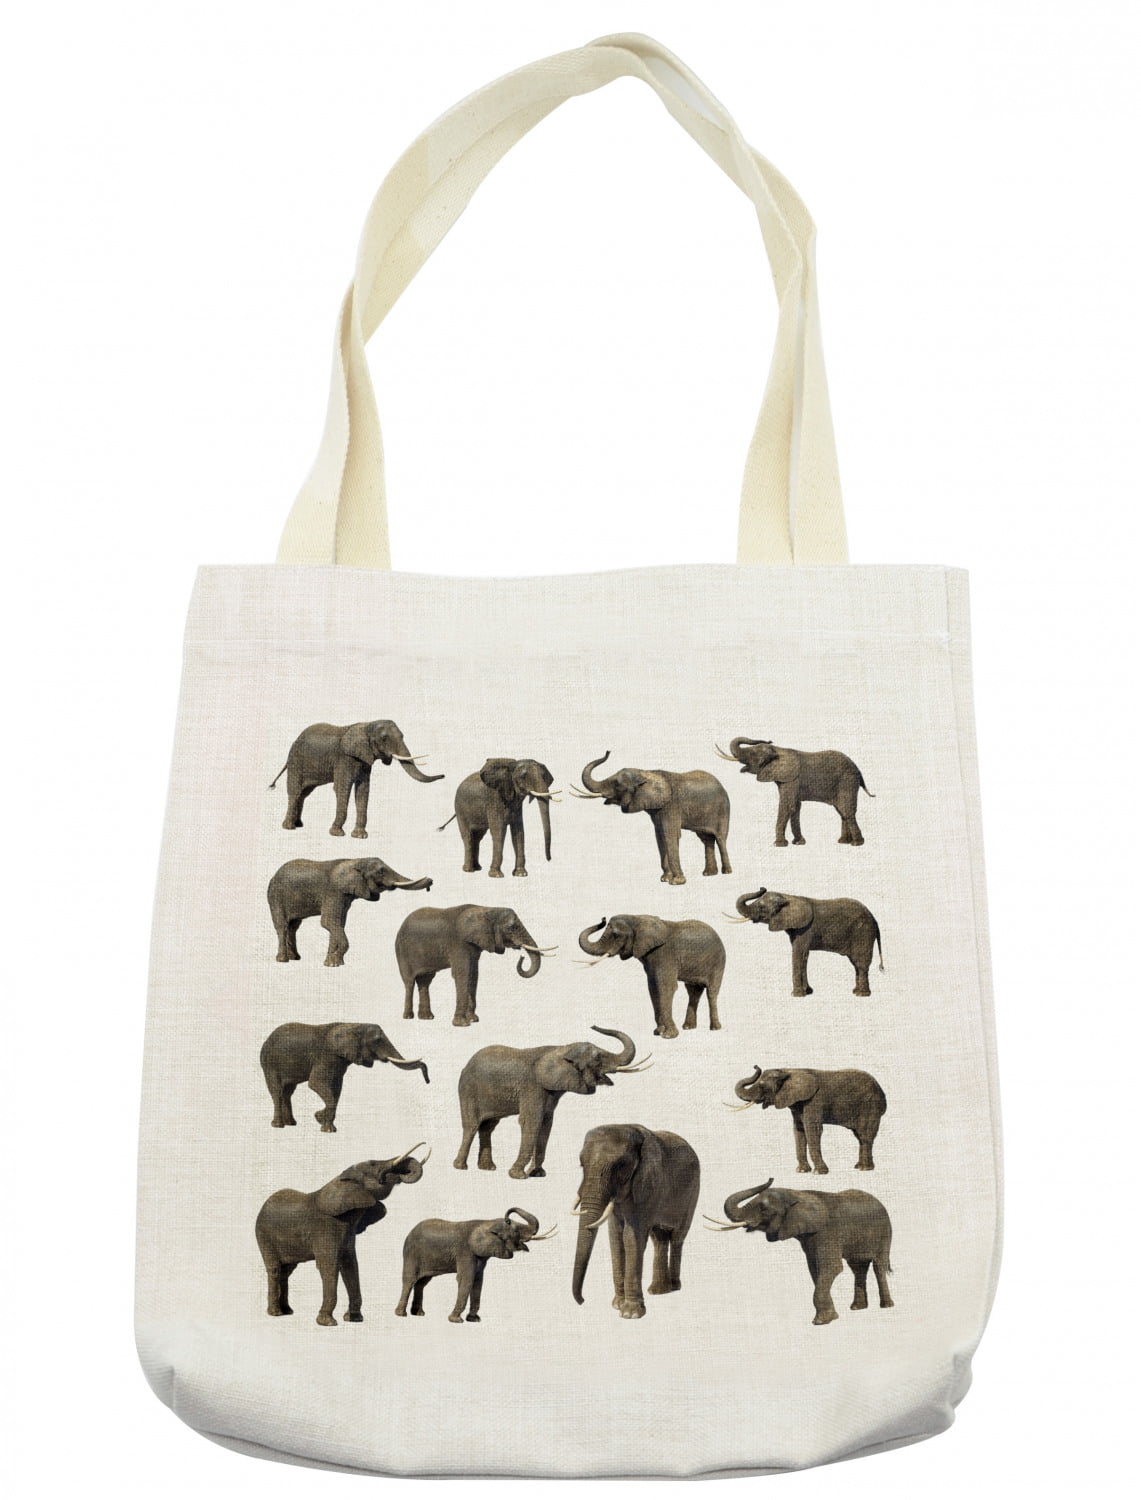 Large Compartment Work or the Beach I Love Elephants Theme Canvas Tote Bag Perfect for School Shoulder Tote 17 x 12 Multiple Colors 